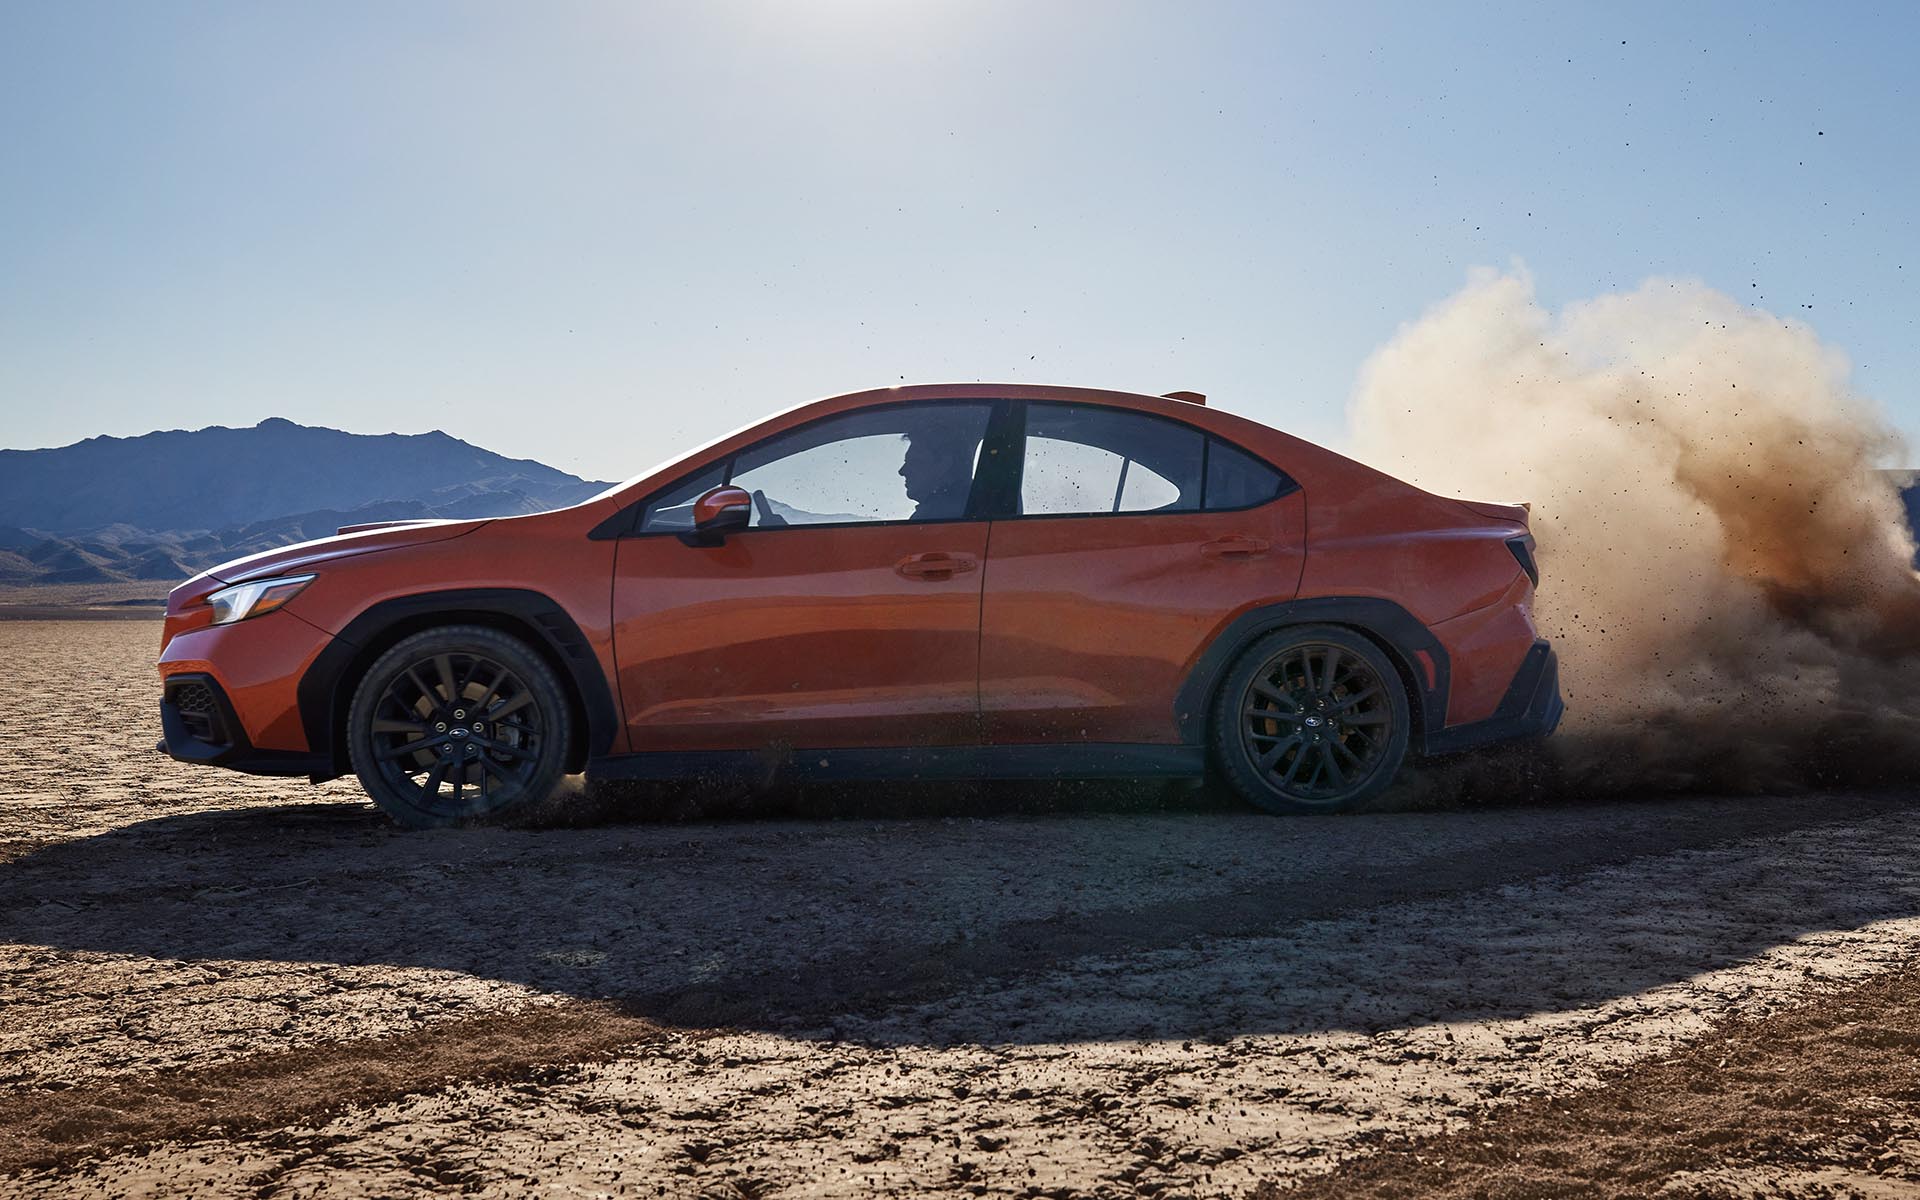 The 2022 Subaru kicking up dirt while driving on a desert road.  